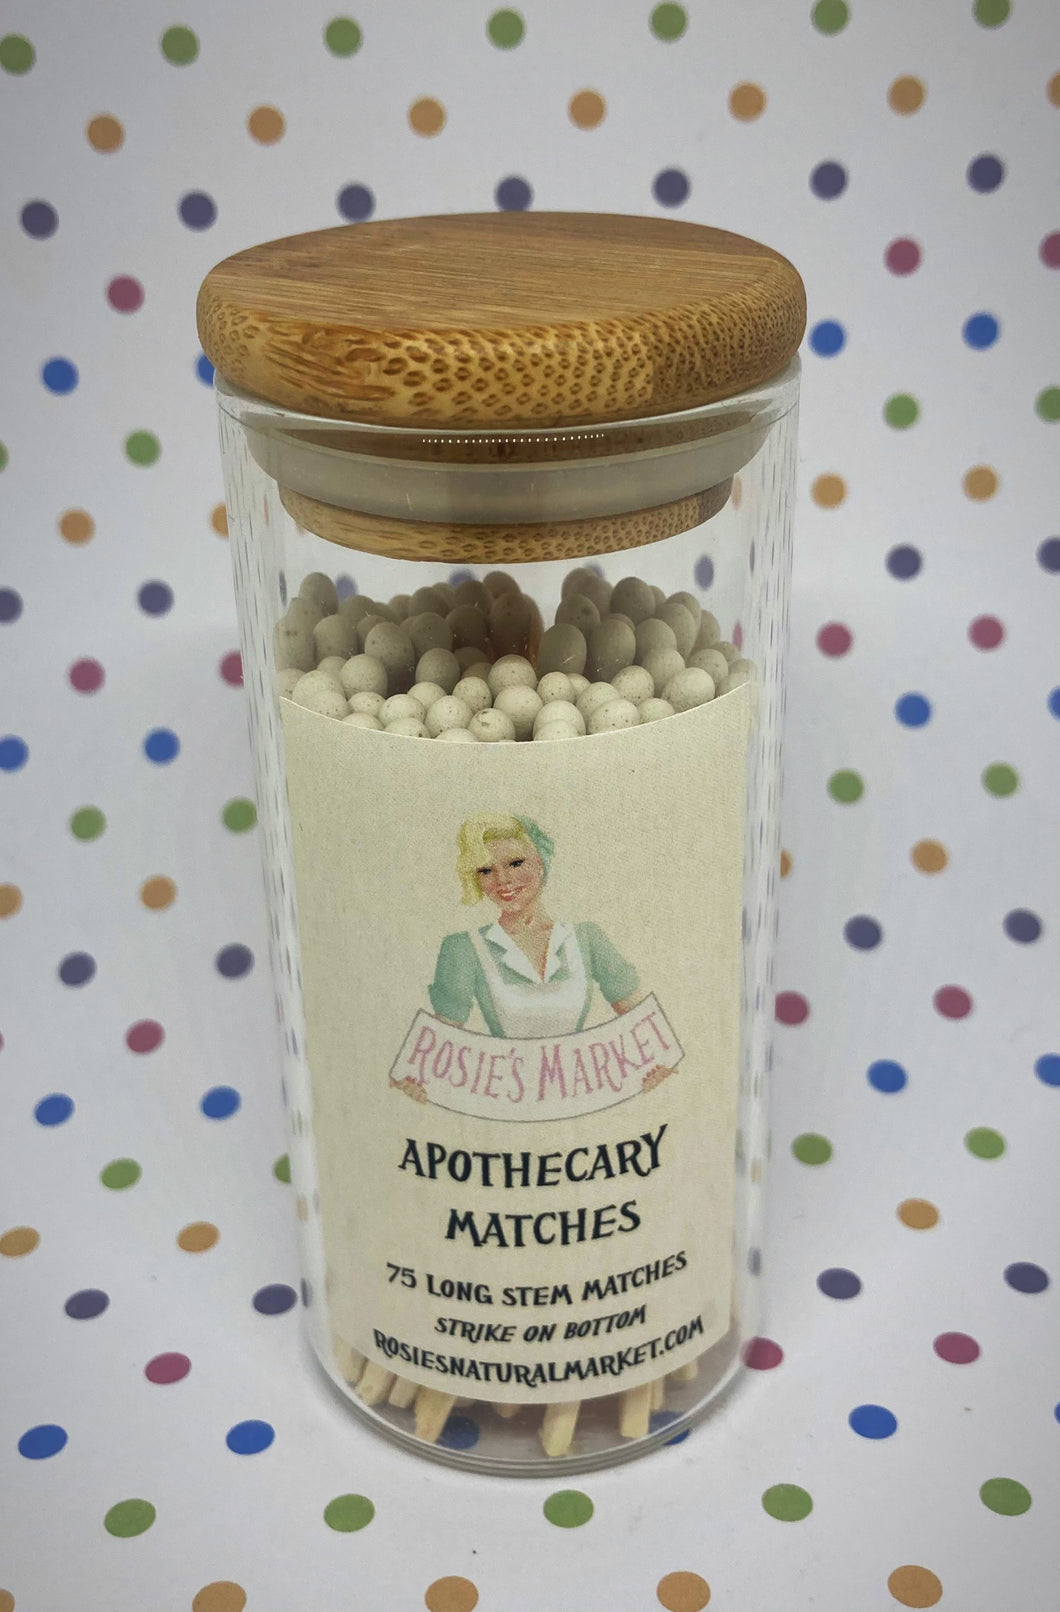 long stem apothecary matches in glass bottle jar